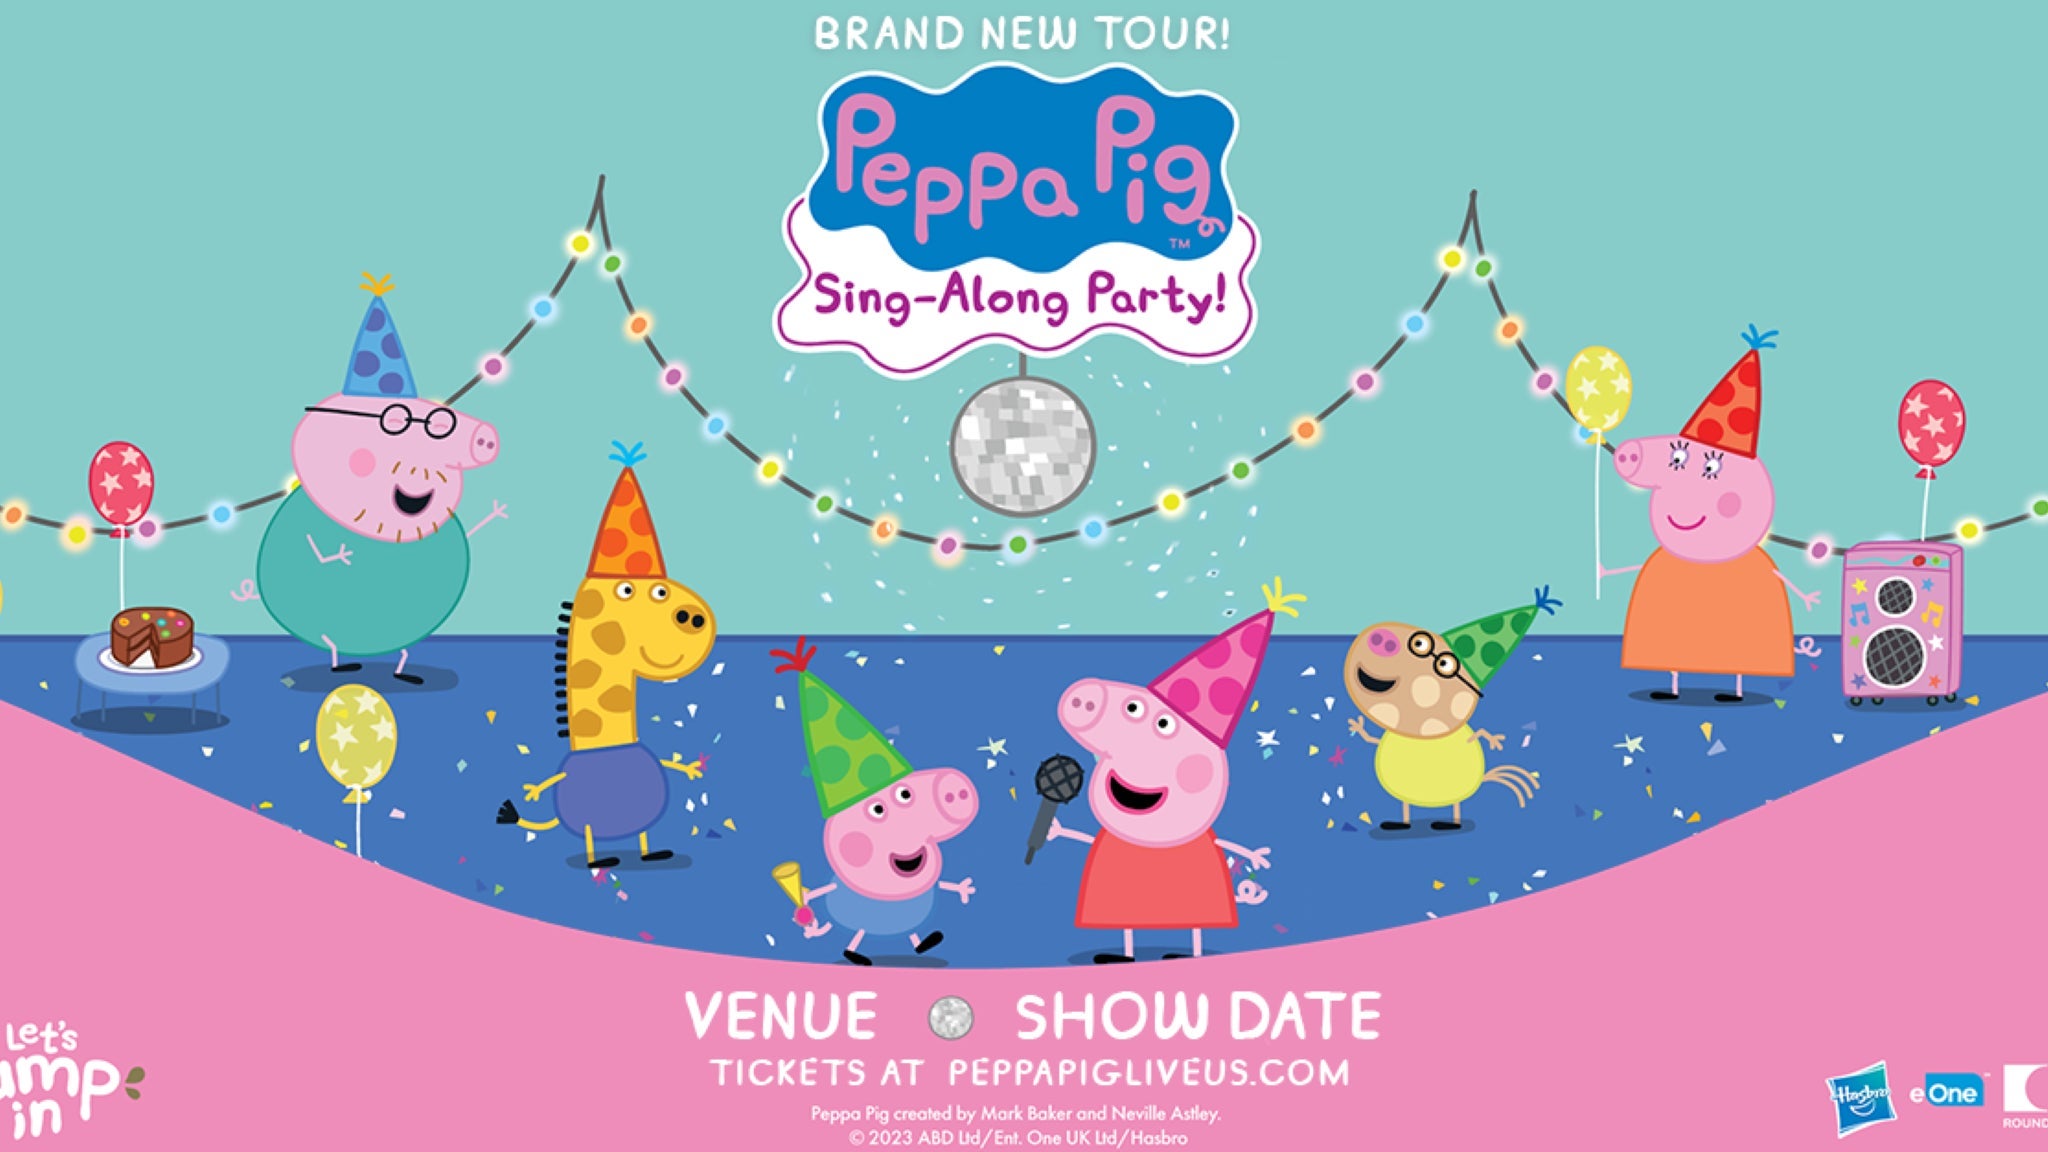 Peppa Pig's Sing-Along-Party!